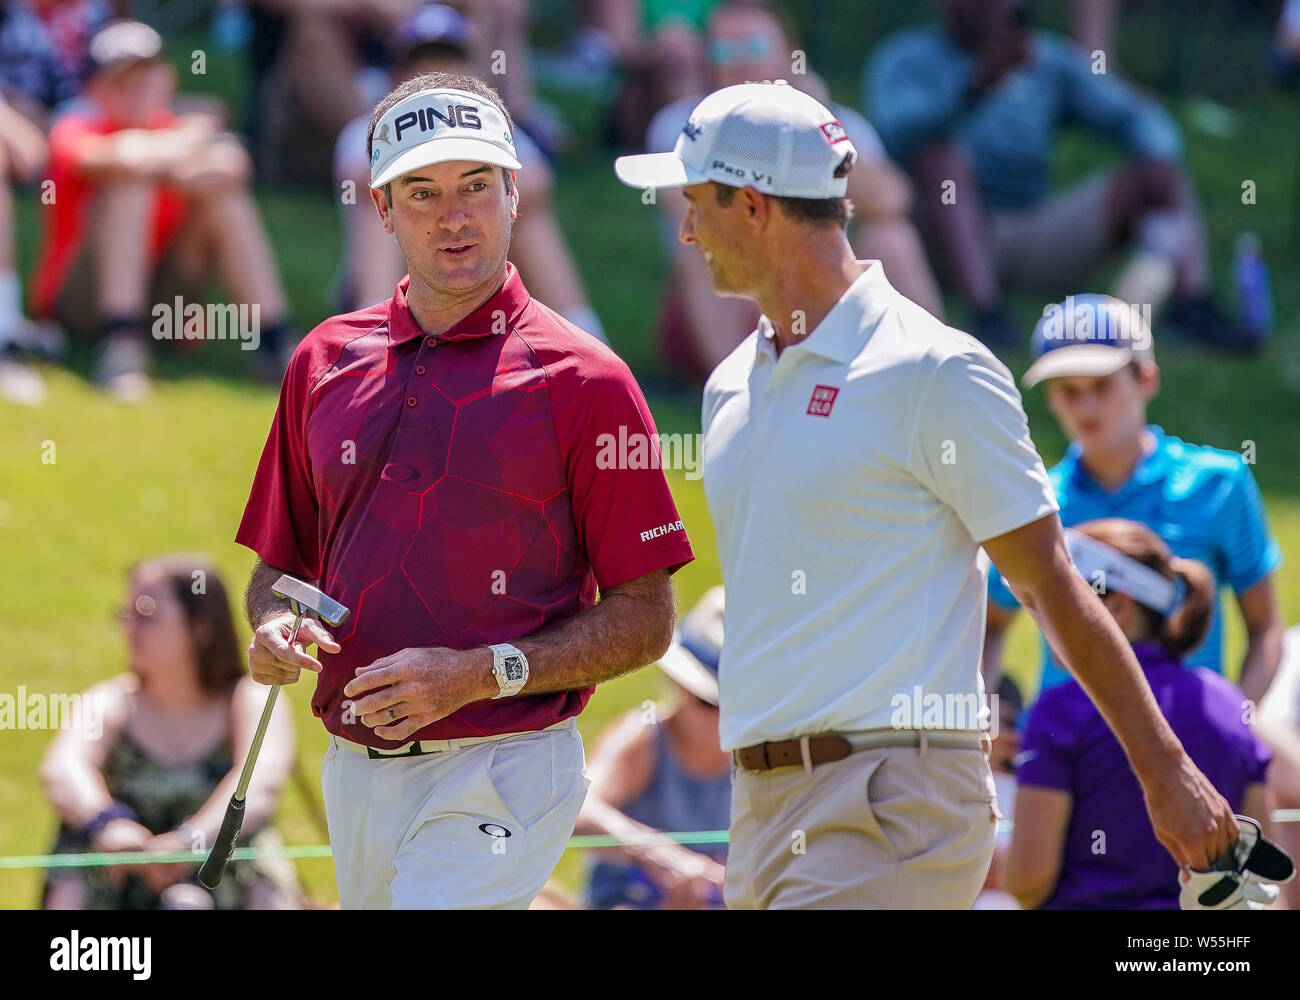 Memphis, TN, USA. 25th July, 2019. Bubba Watson, of the United States, talks with Adam Scott, of Australia, during the first round of the WGC-FedEx St. Jude Invitational golf tournament at TPC Southwind in Memphis, TN. Gray Siegel/Cal Sport Media/Alamy Live News Stock Photo